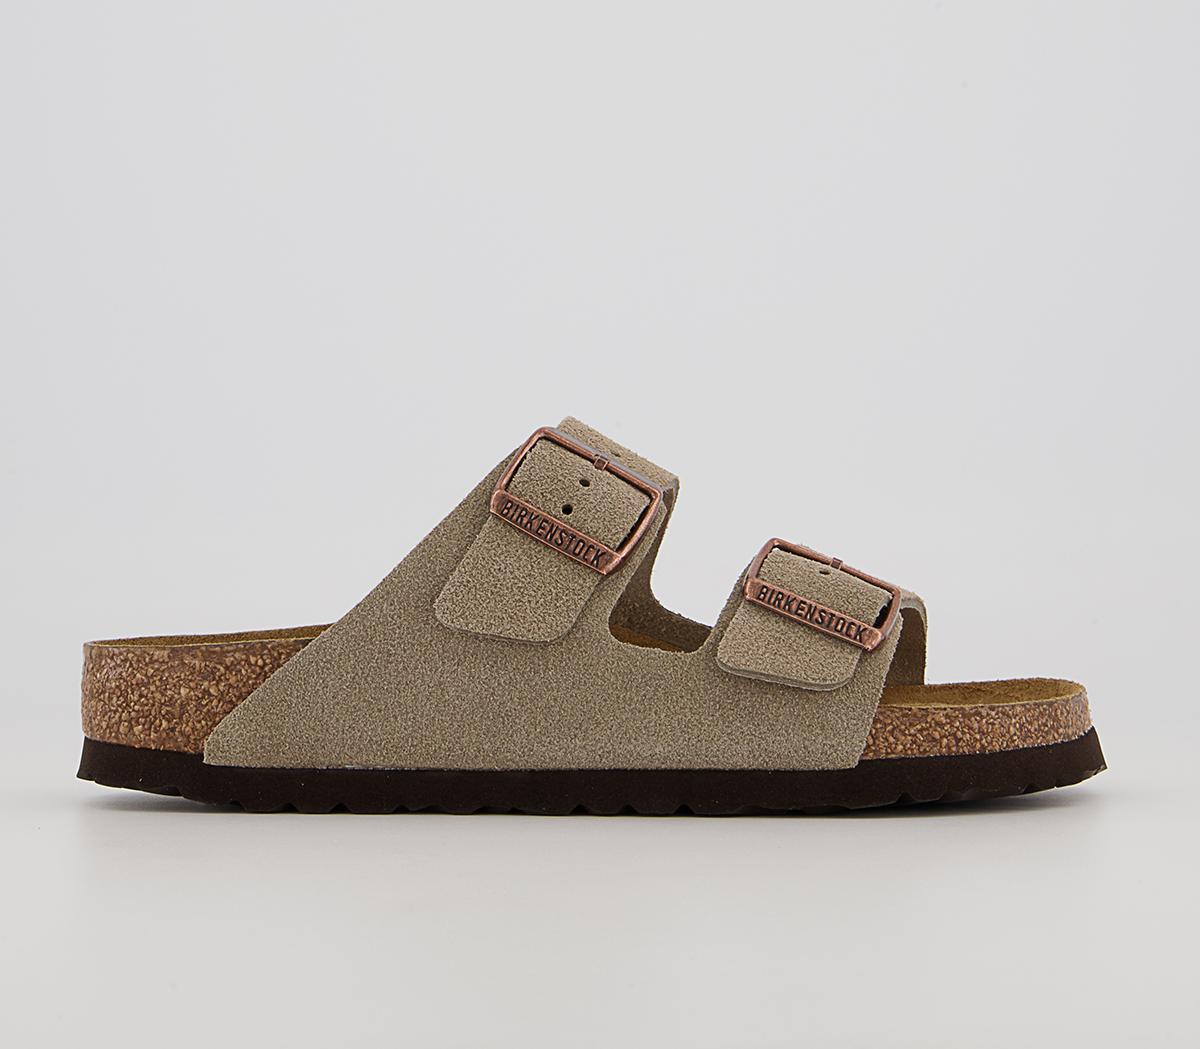 BIRKENSTOCK Arizona Two Strap Sandals Suede Leather Taupe - Women's Sandals